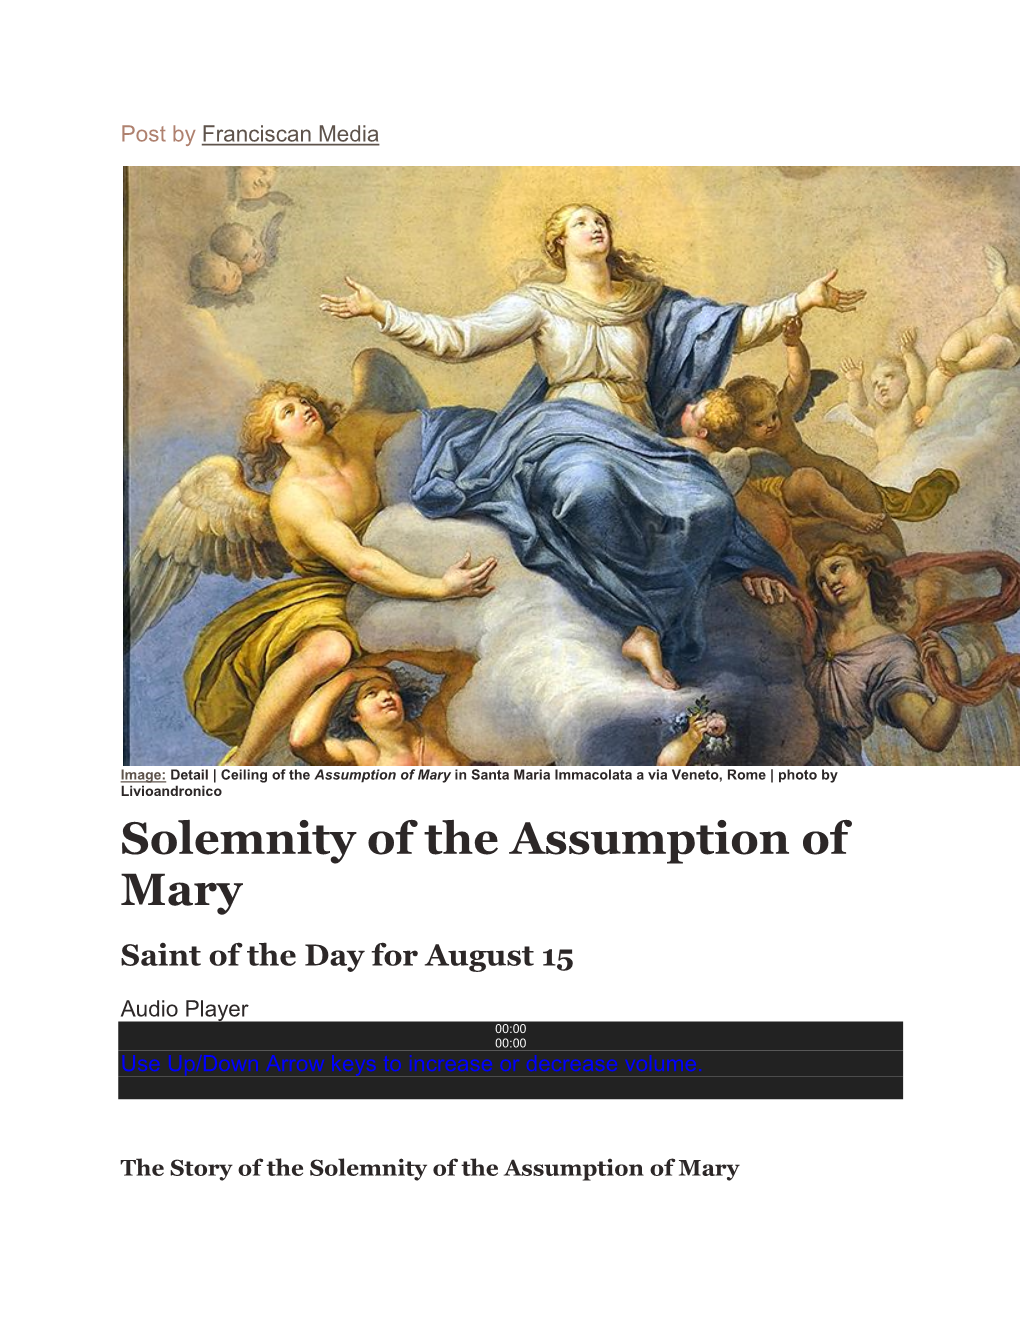 Solemnity of the Assumption of Mary Saint of the Day for August 15